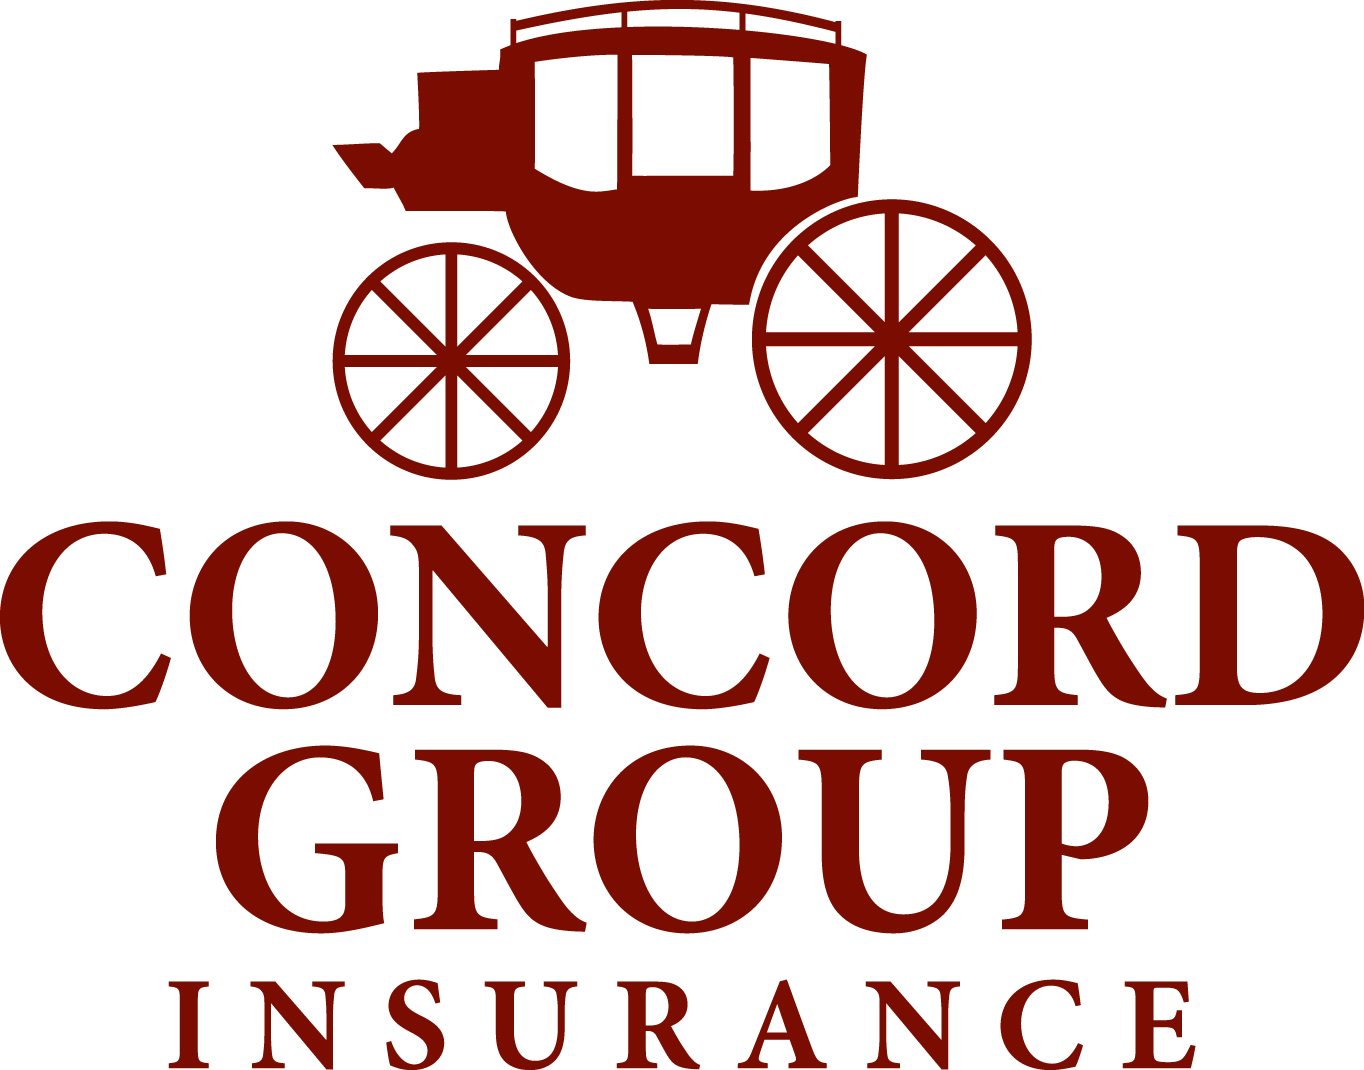 Concord Group Insurance logo